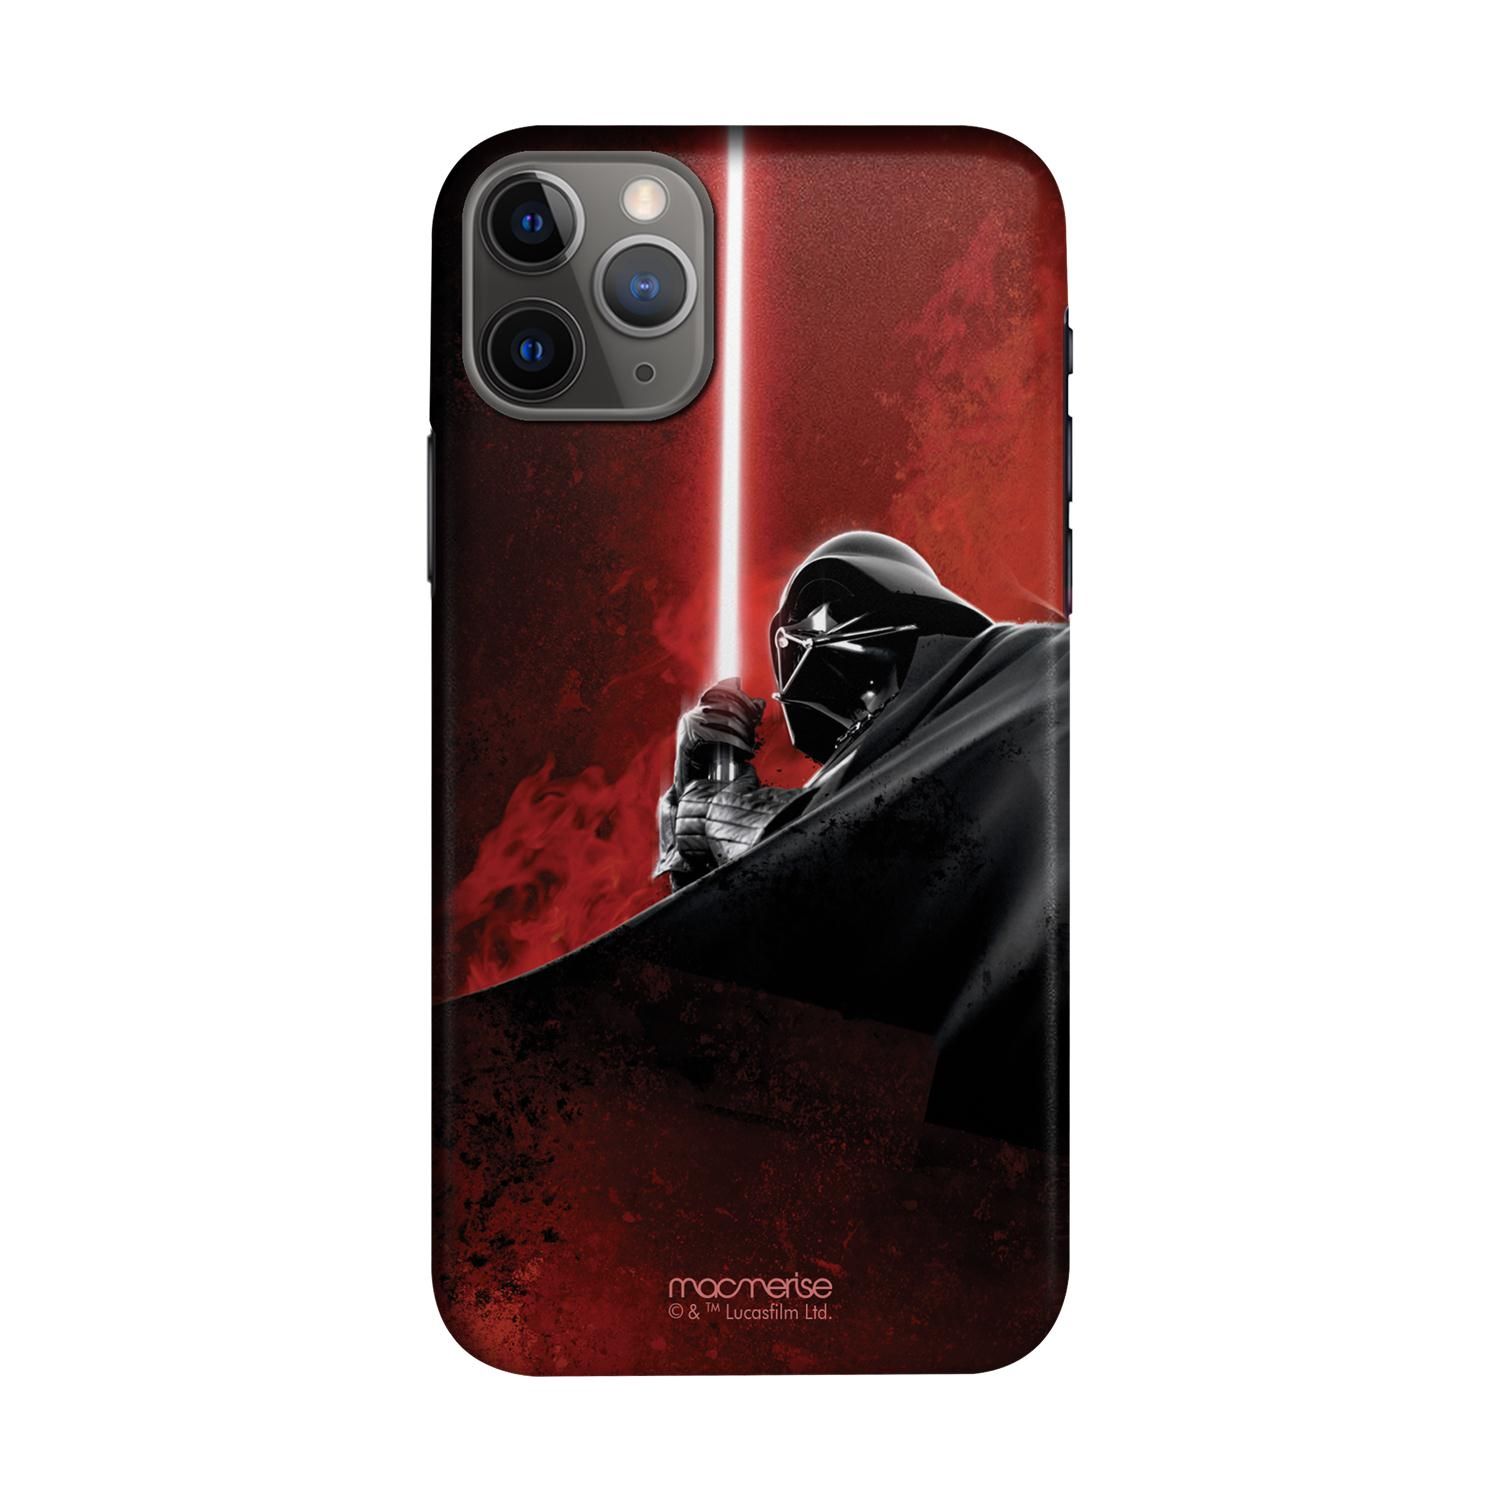 Buy The Vader Attack - Sleek Phone Case for iPhone 11 Pro Max Online